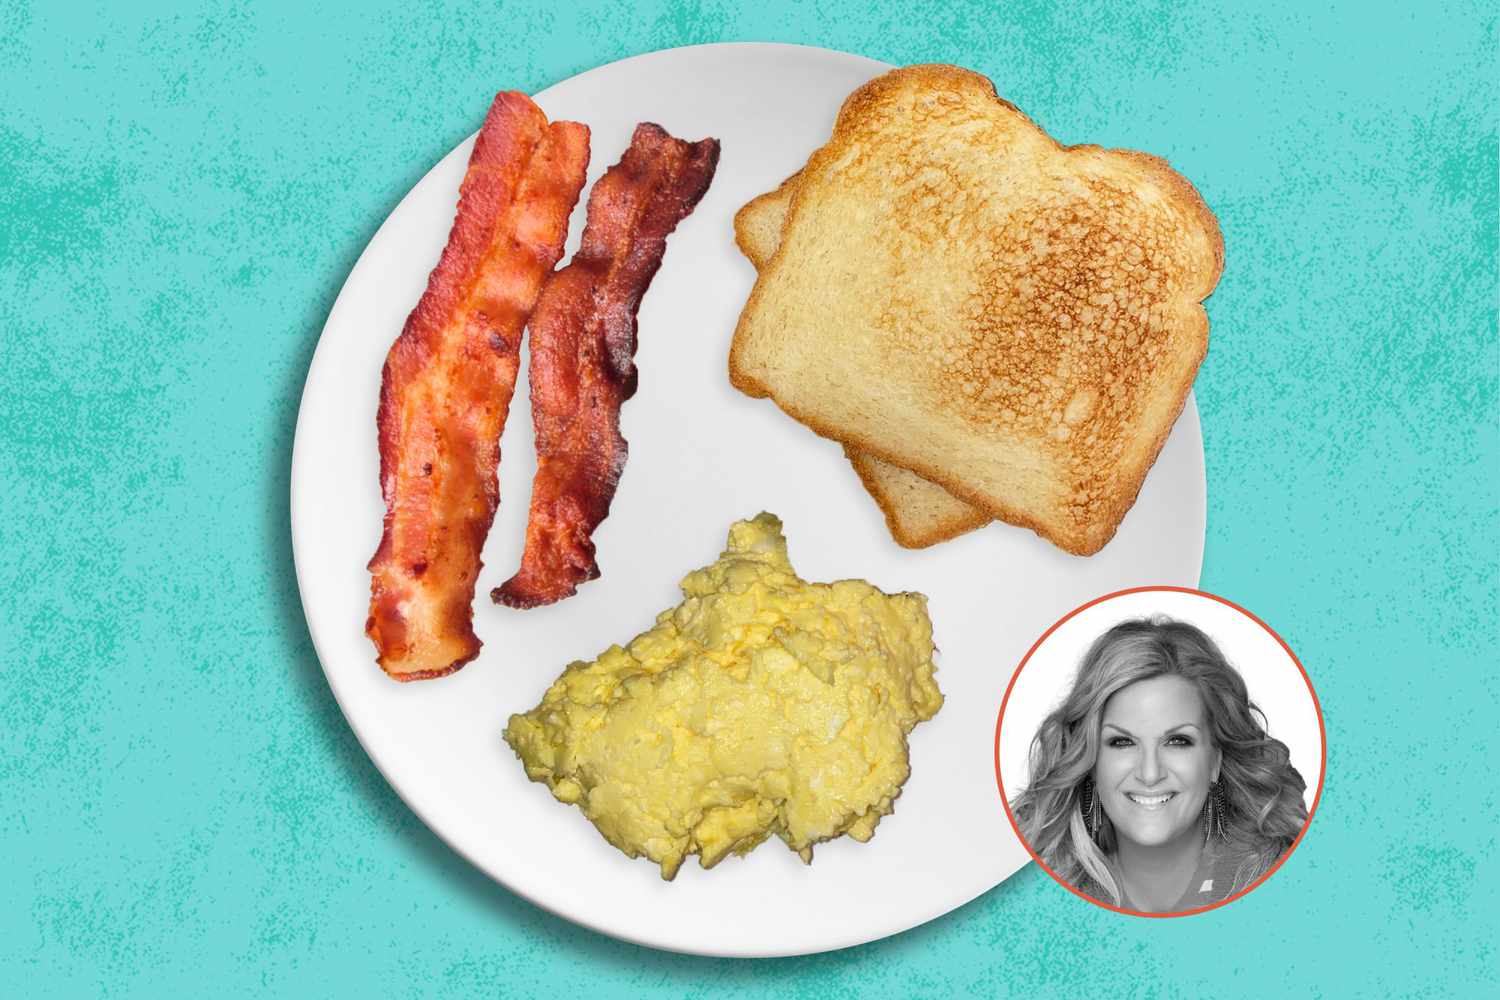 plate of scrambled eggs, bacon, and toast with Trisha Yearwood's face